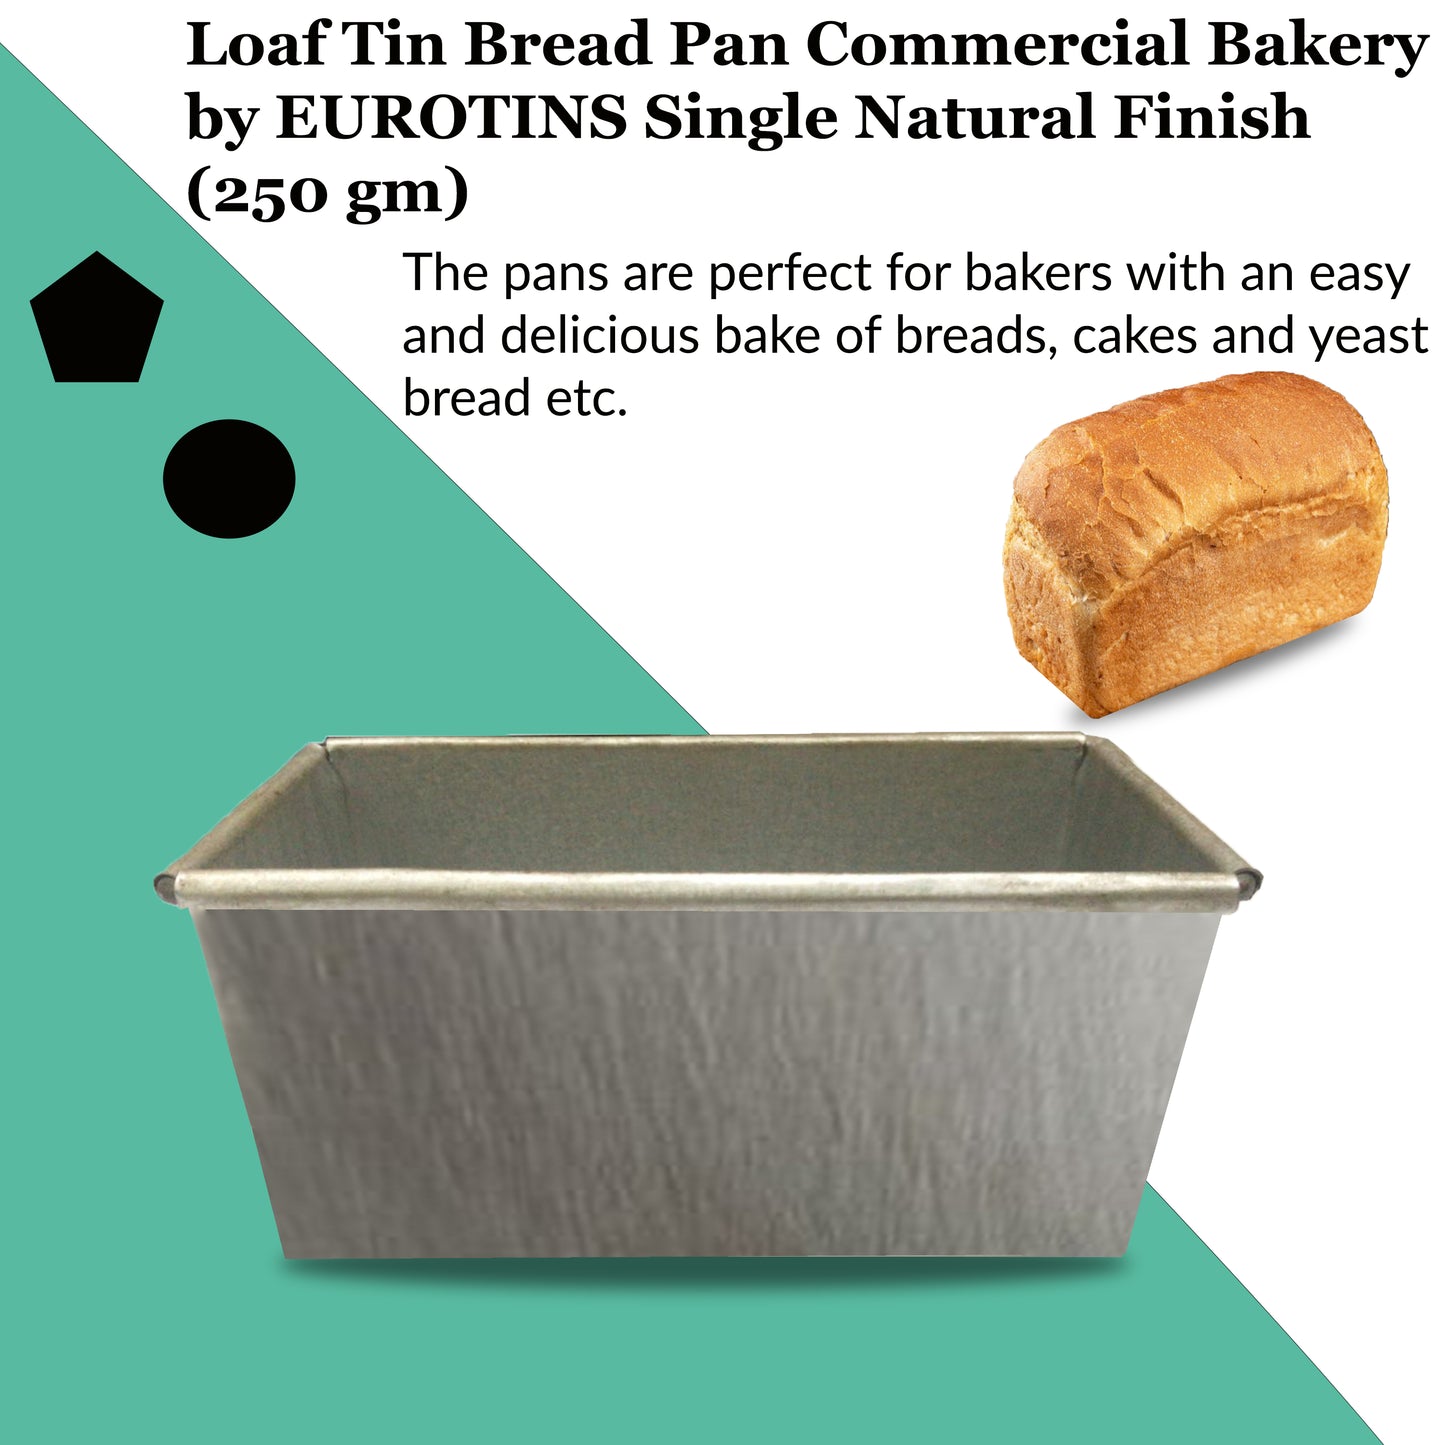 Singles Loaf Tin Bread Pan Commercial Bakery by EUROTINS